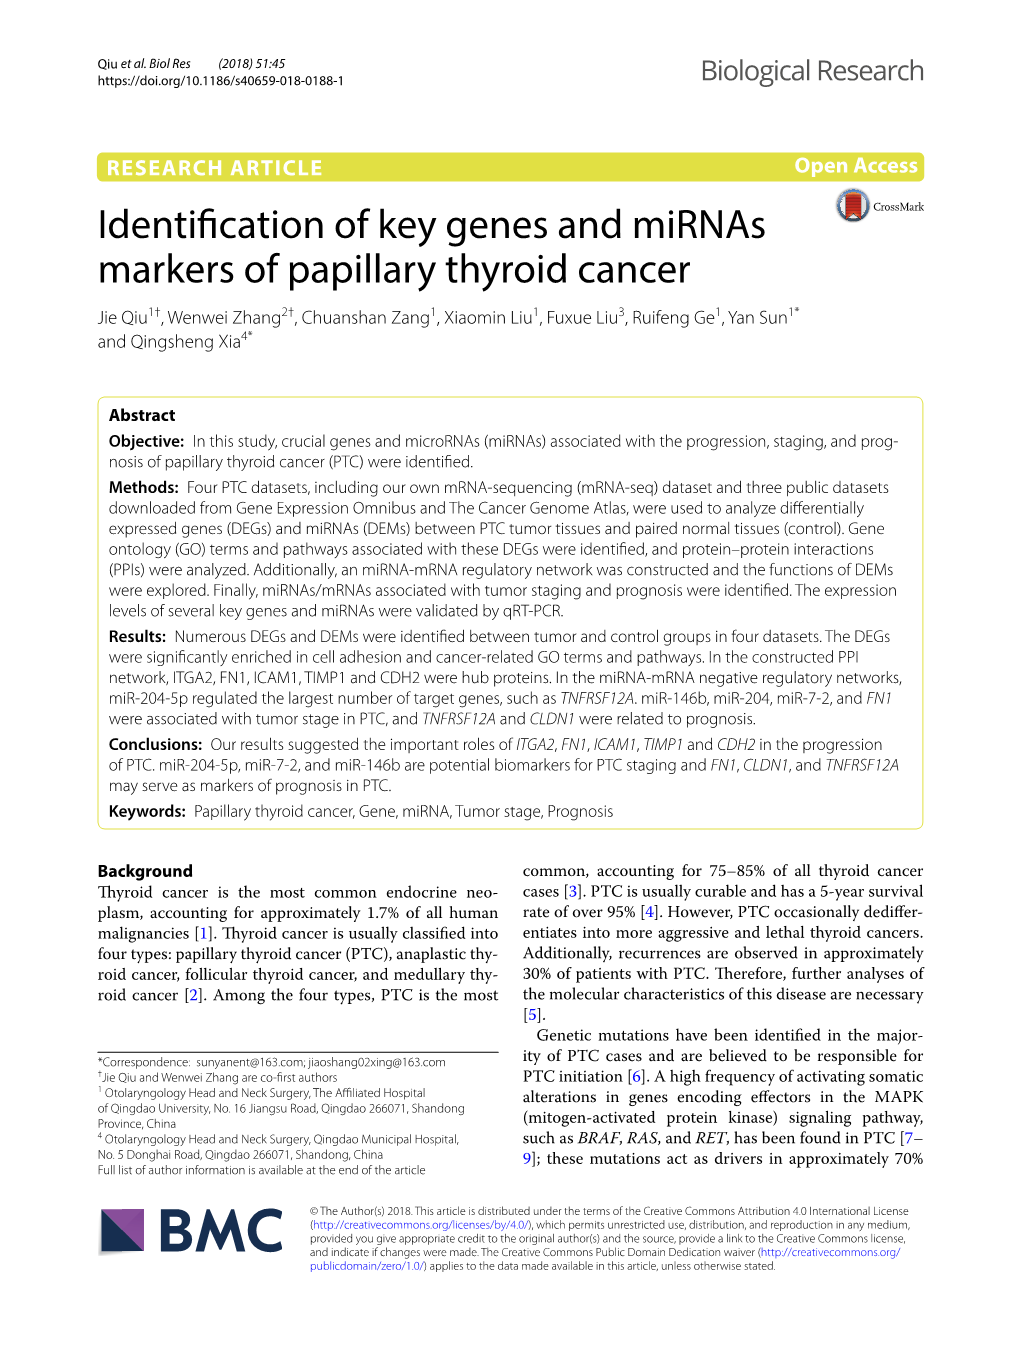 Identification of Key Genes and Mirnas Markers of Papillary Thyroid